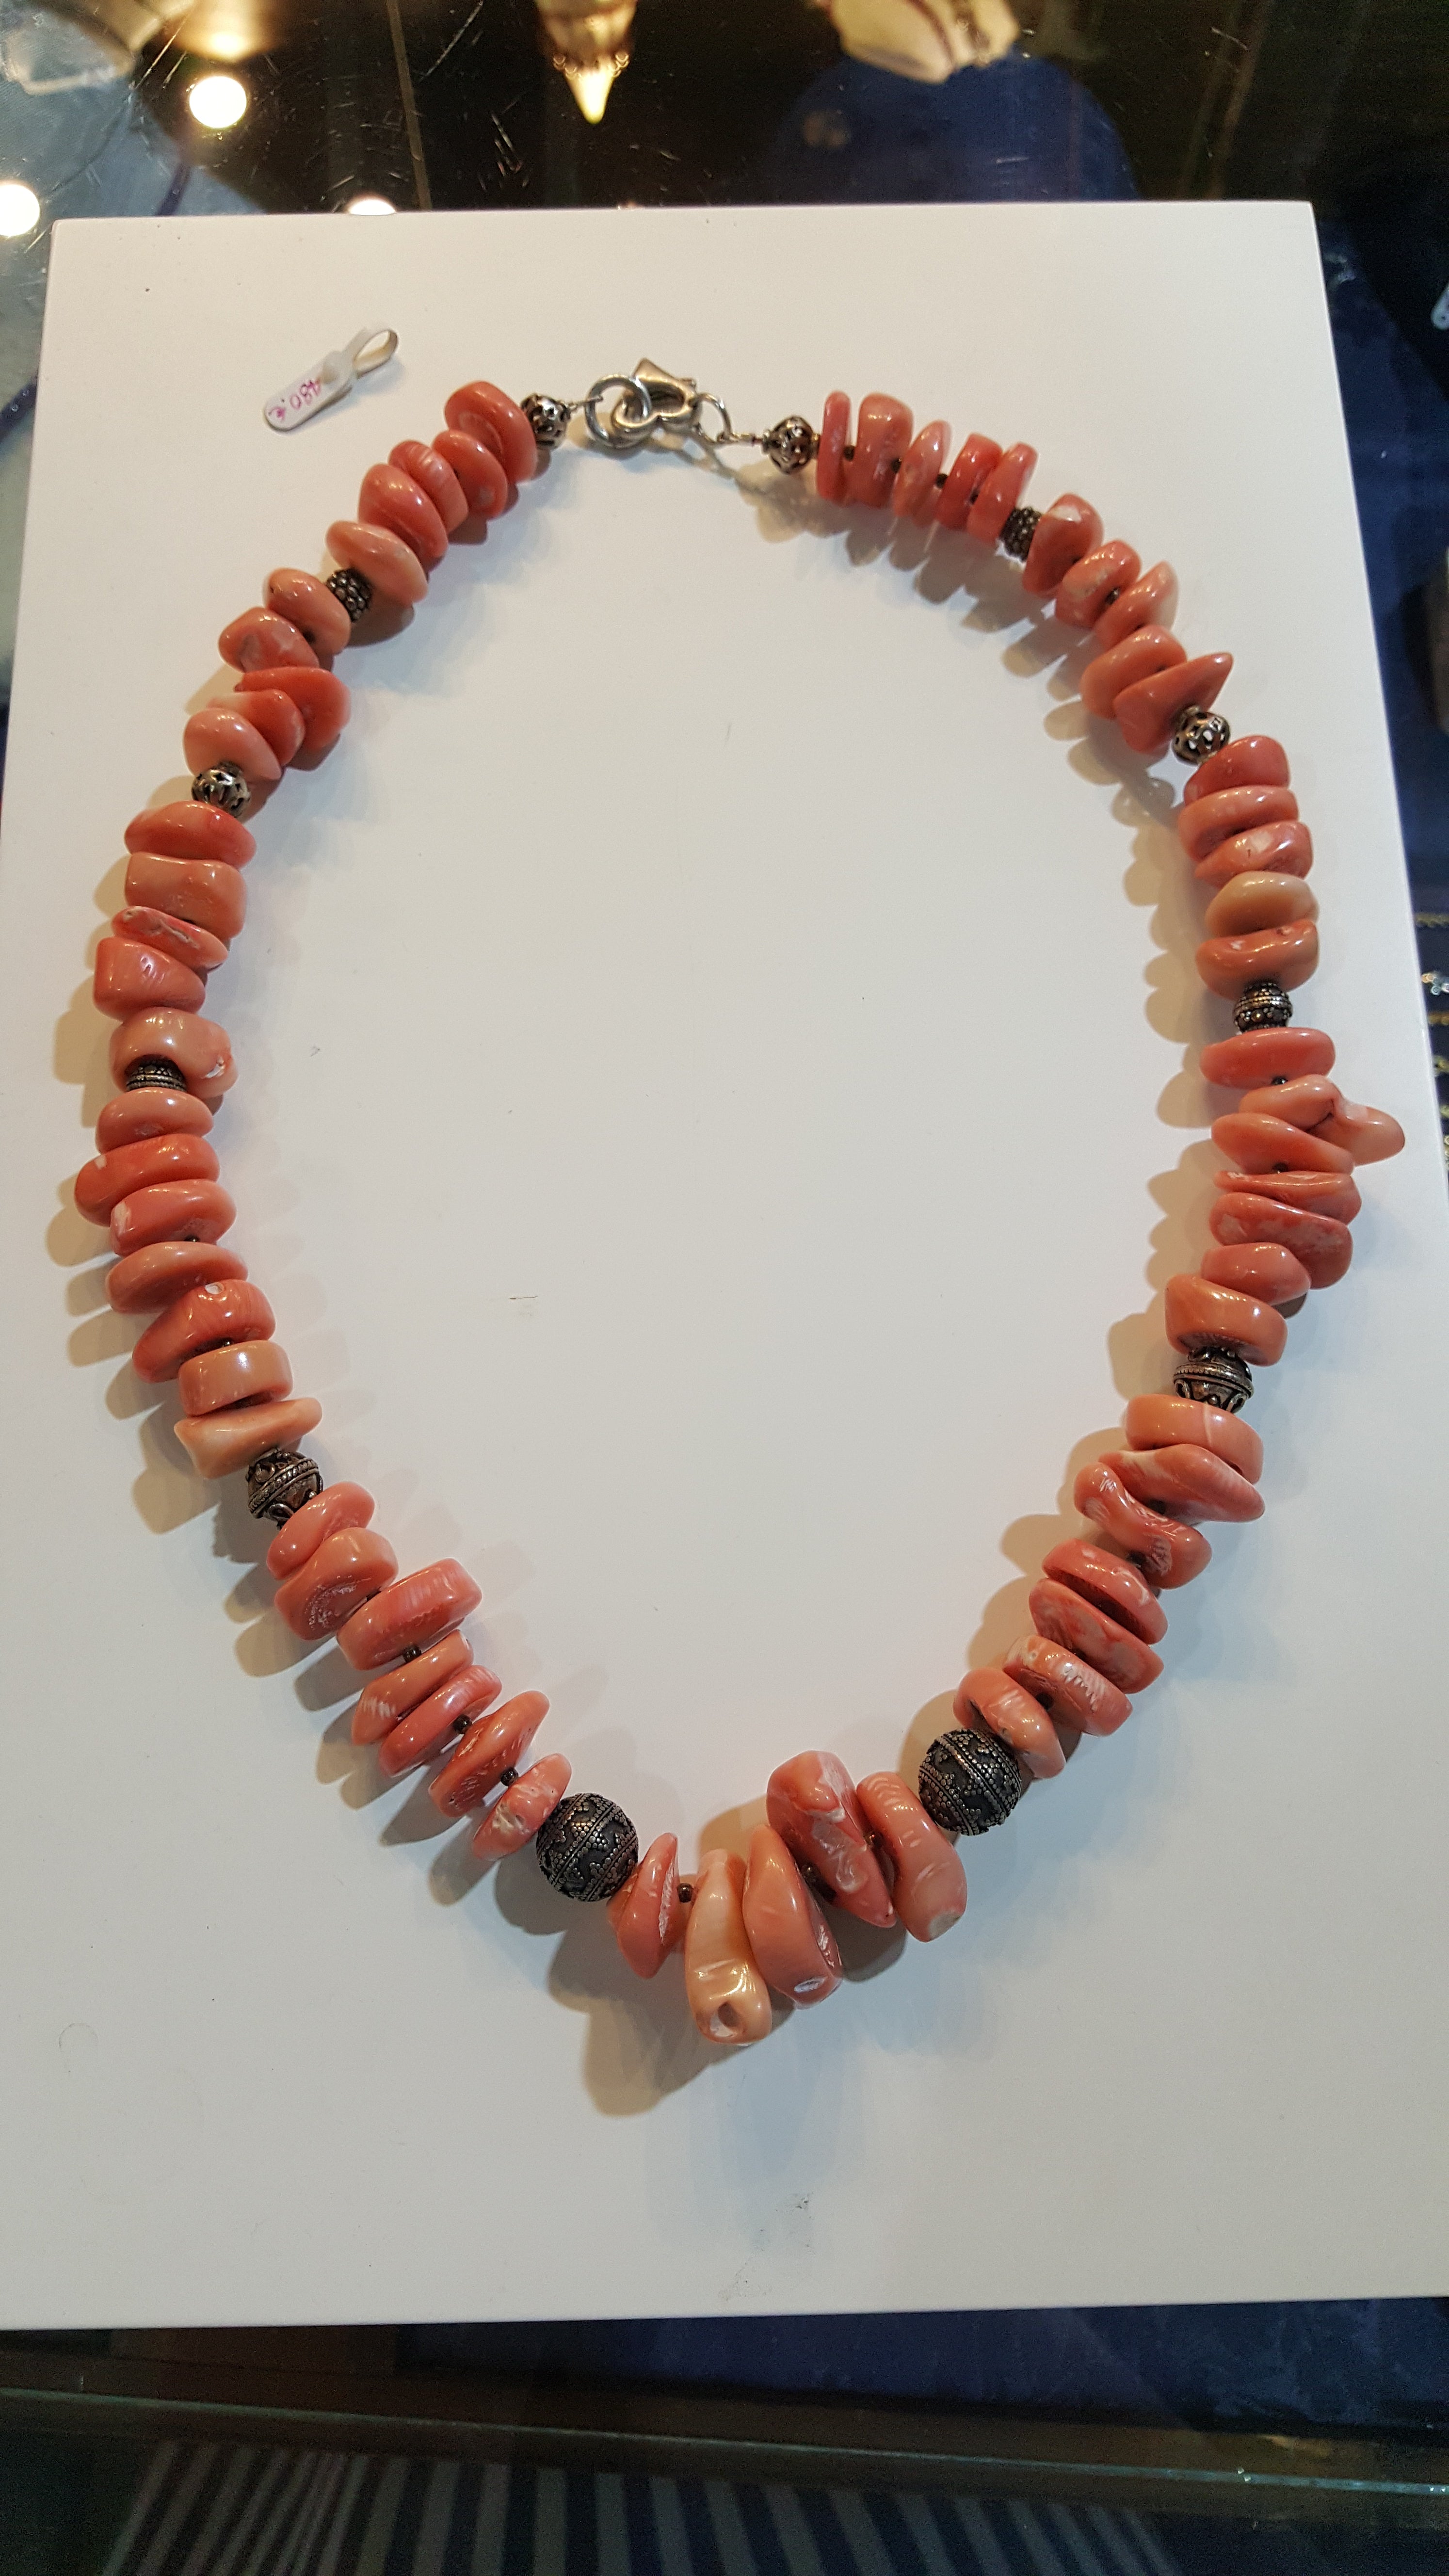 Necklace with baroque Pink Coral Stones (Angel Skin) and Silver Elements